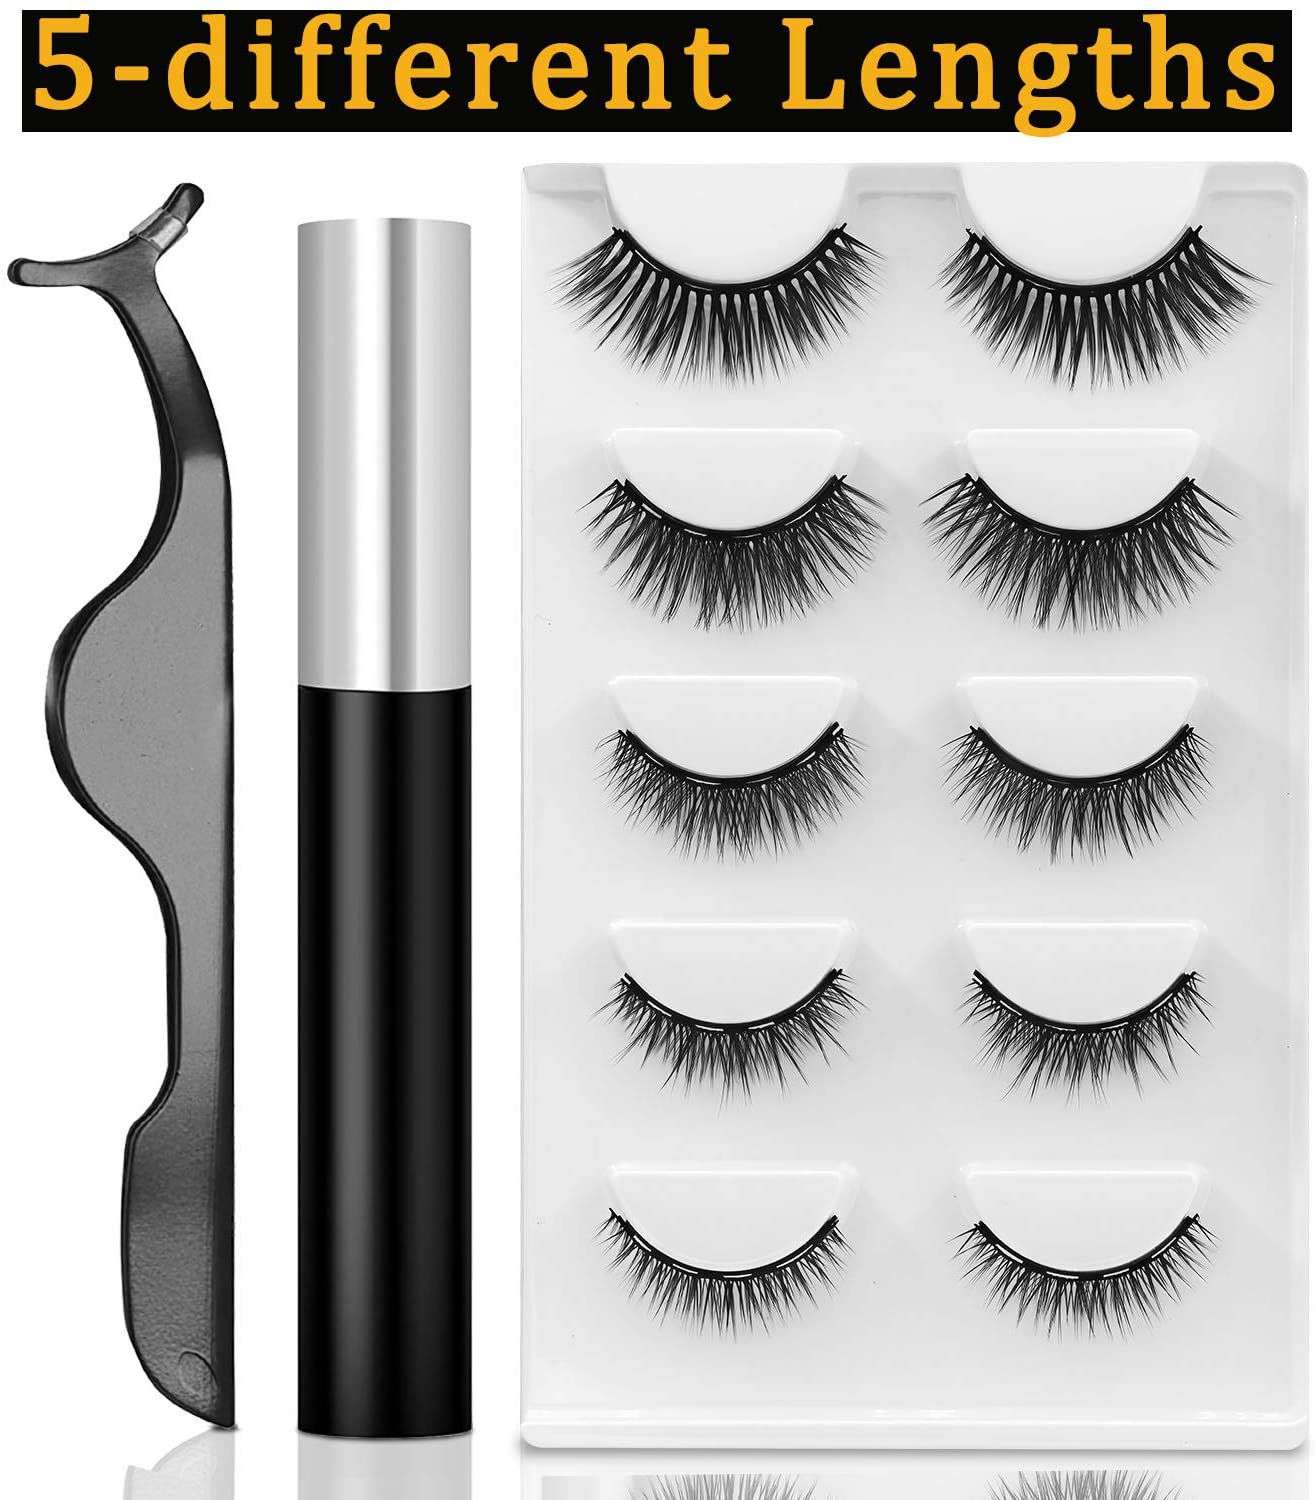 Magnetic Eyelashes Kit Magnetic Eyeliner With Magnetic Eyelashes Magnetic Lashliner For Use with Magnetic False Lashes Natural Look-No Glue Needed (5-Pairs) - e4cents